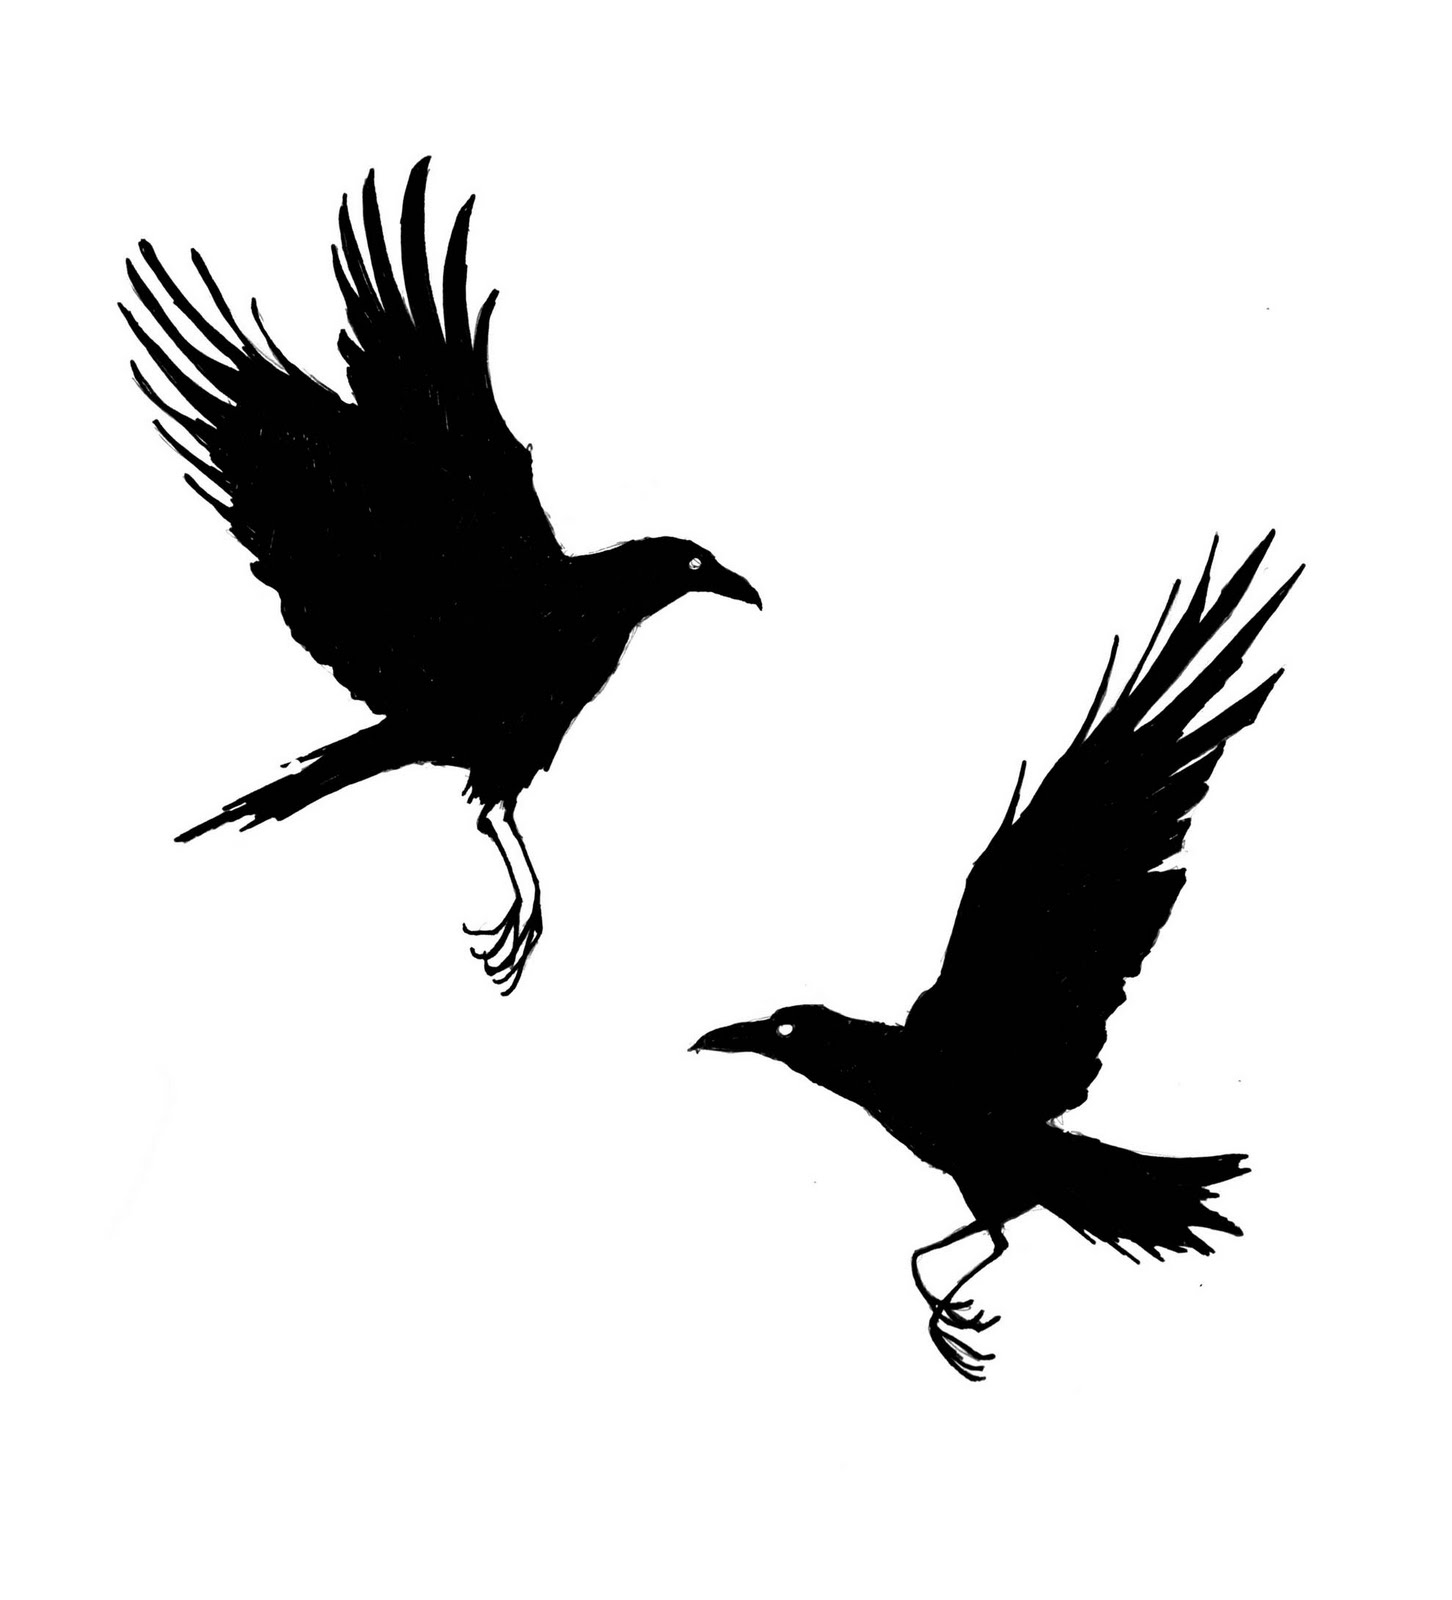 Crow Drawings - ClipArt Best